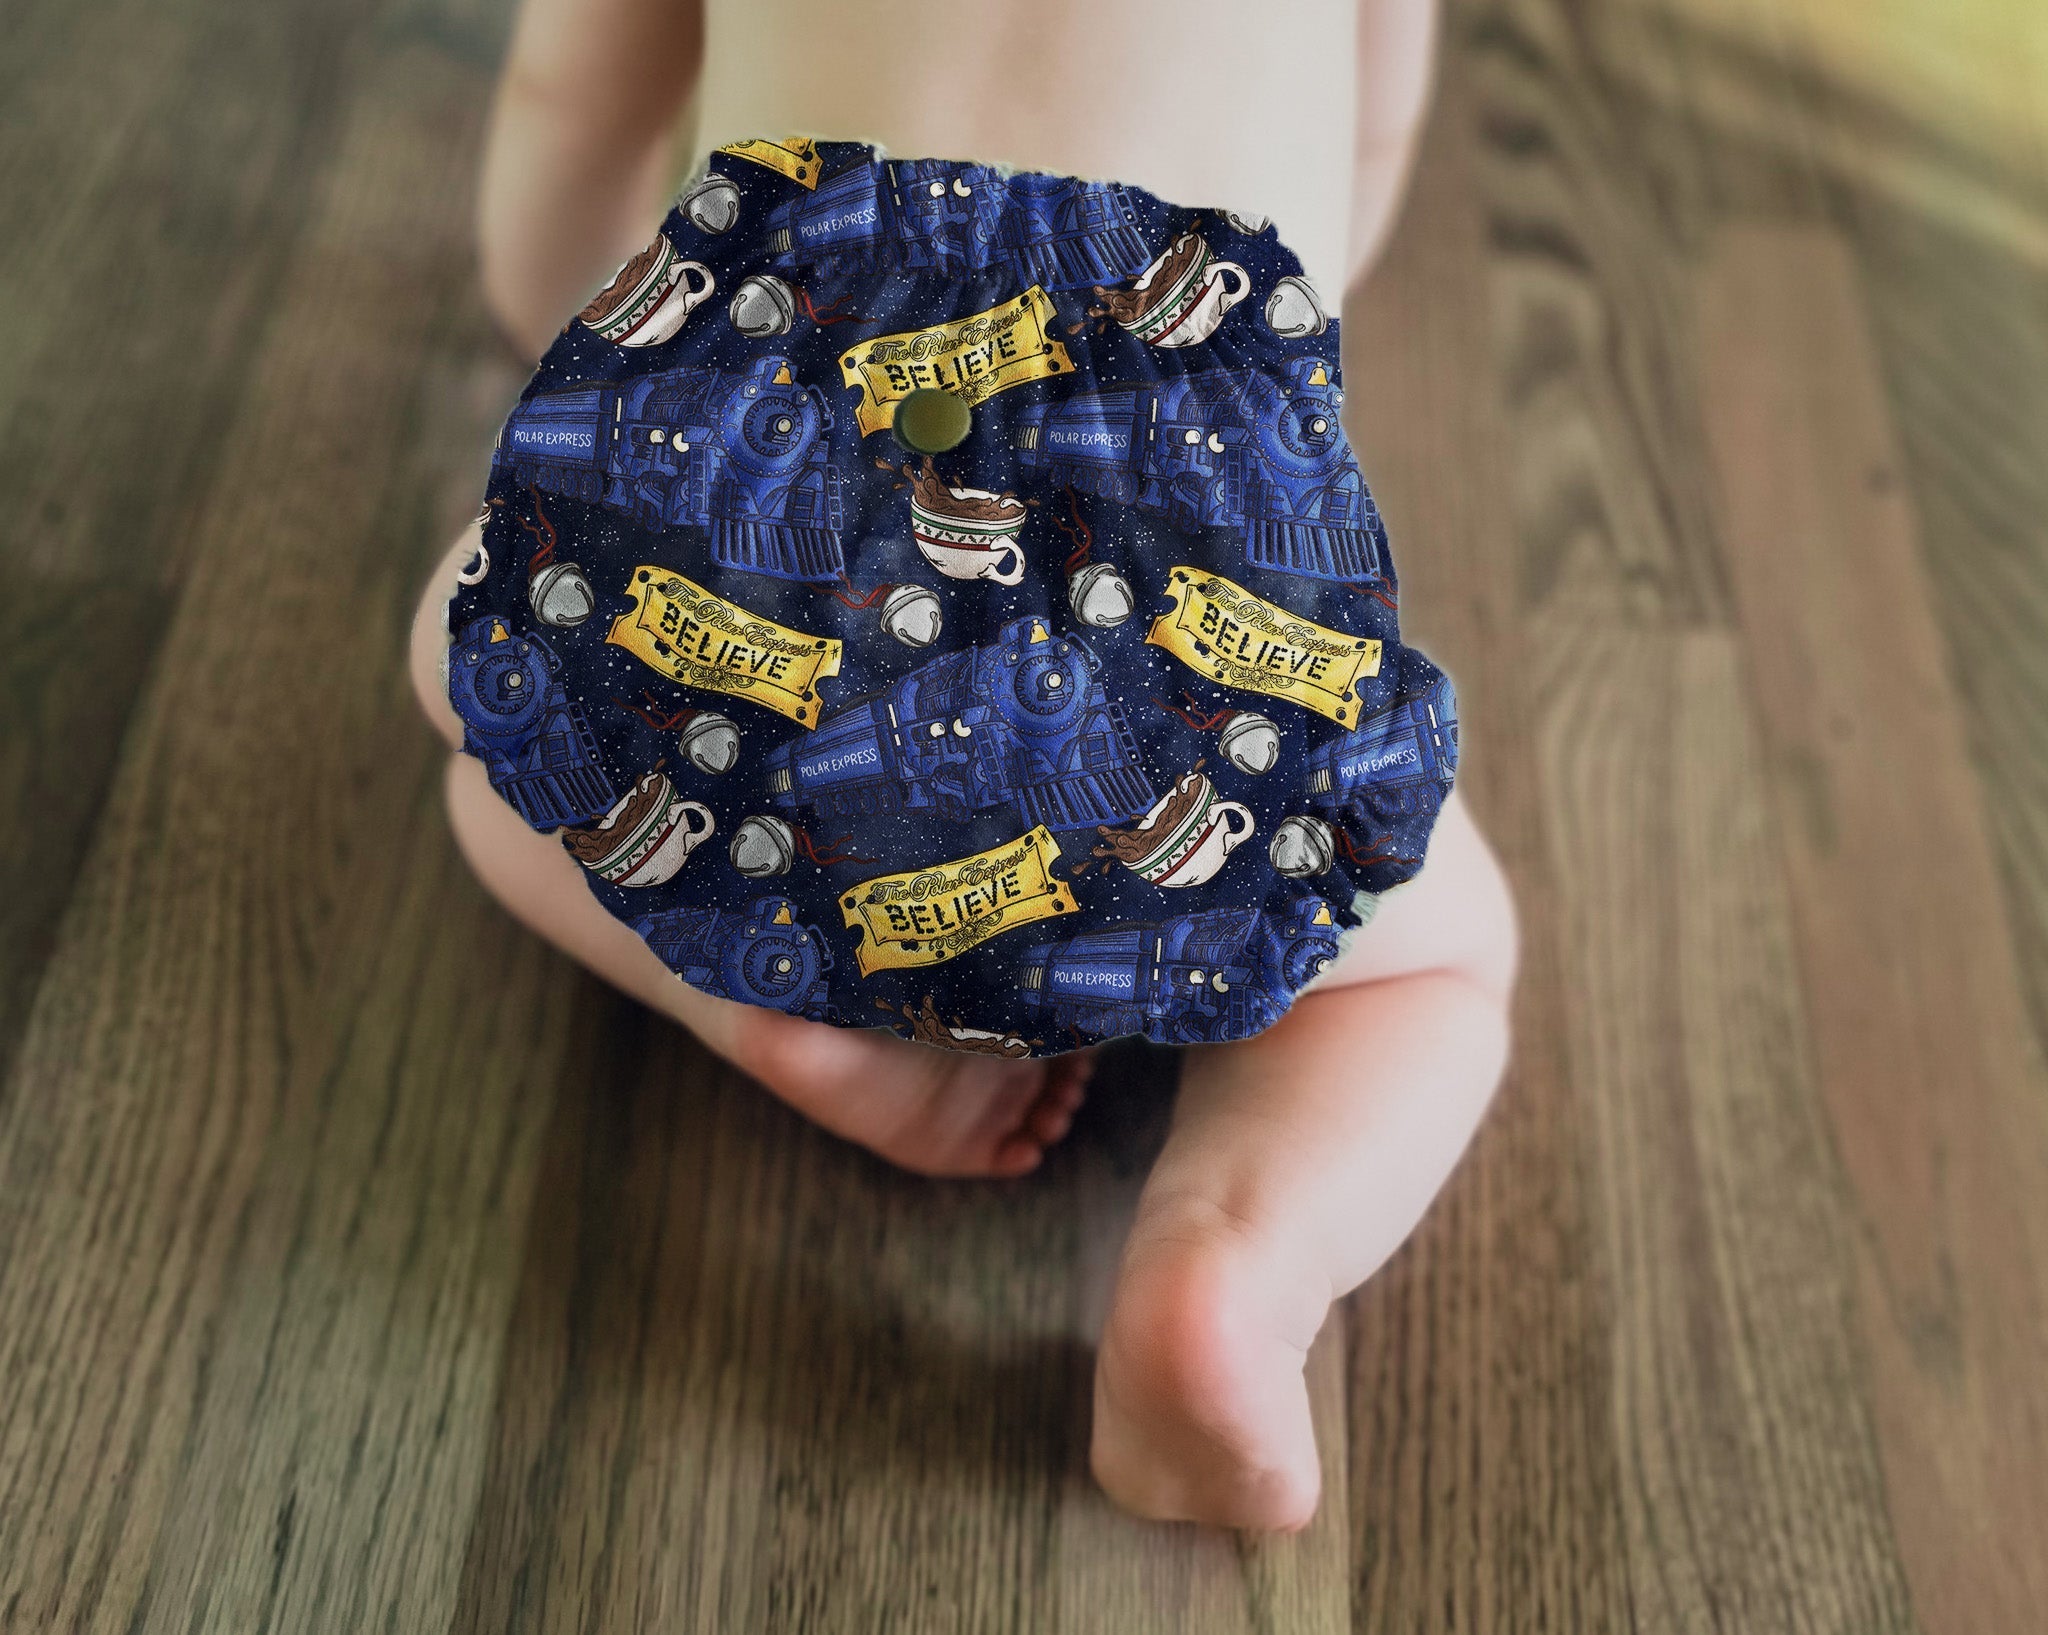 DOORBUSTER-Ticket to the North Pole A Very Merry Clothmas Presale-Legacy Ruffled Elastic Pocket Diaper